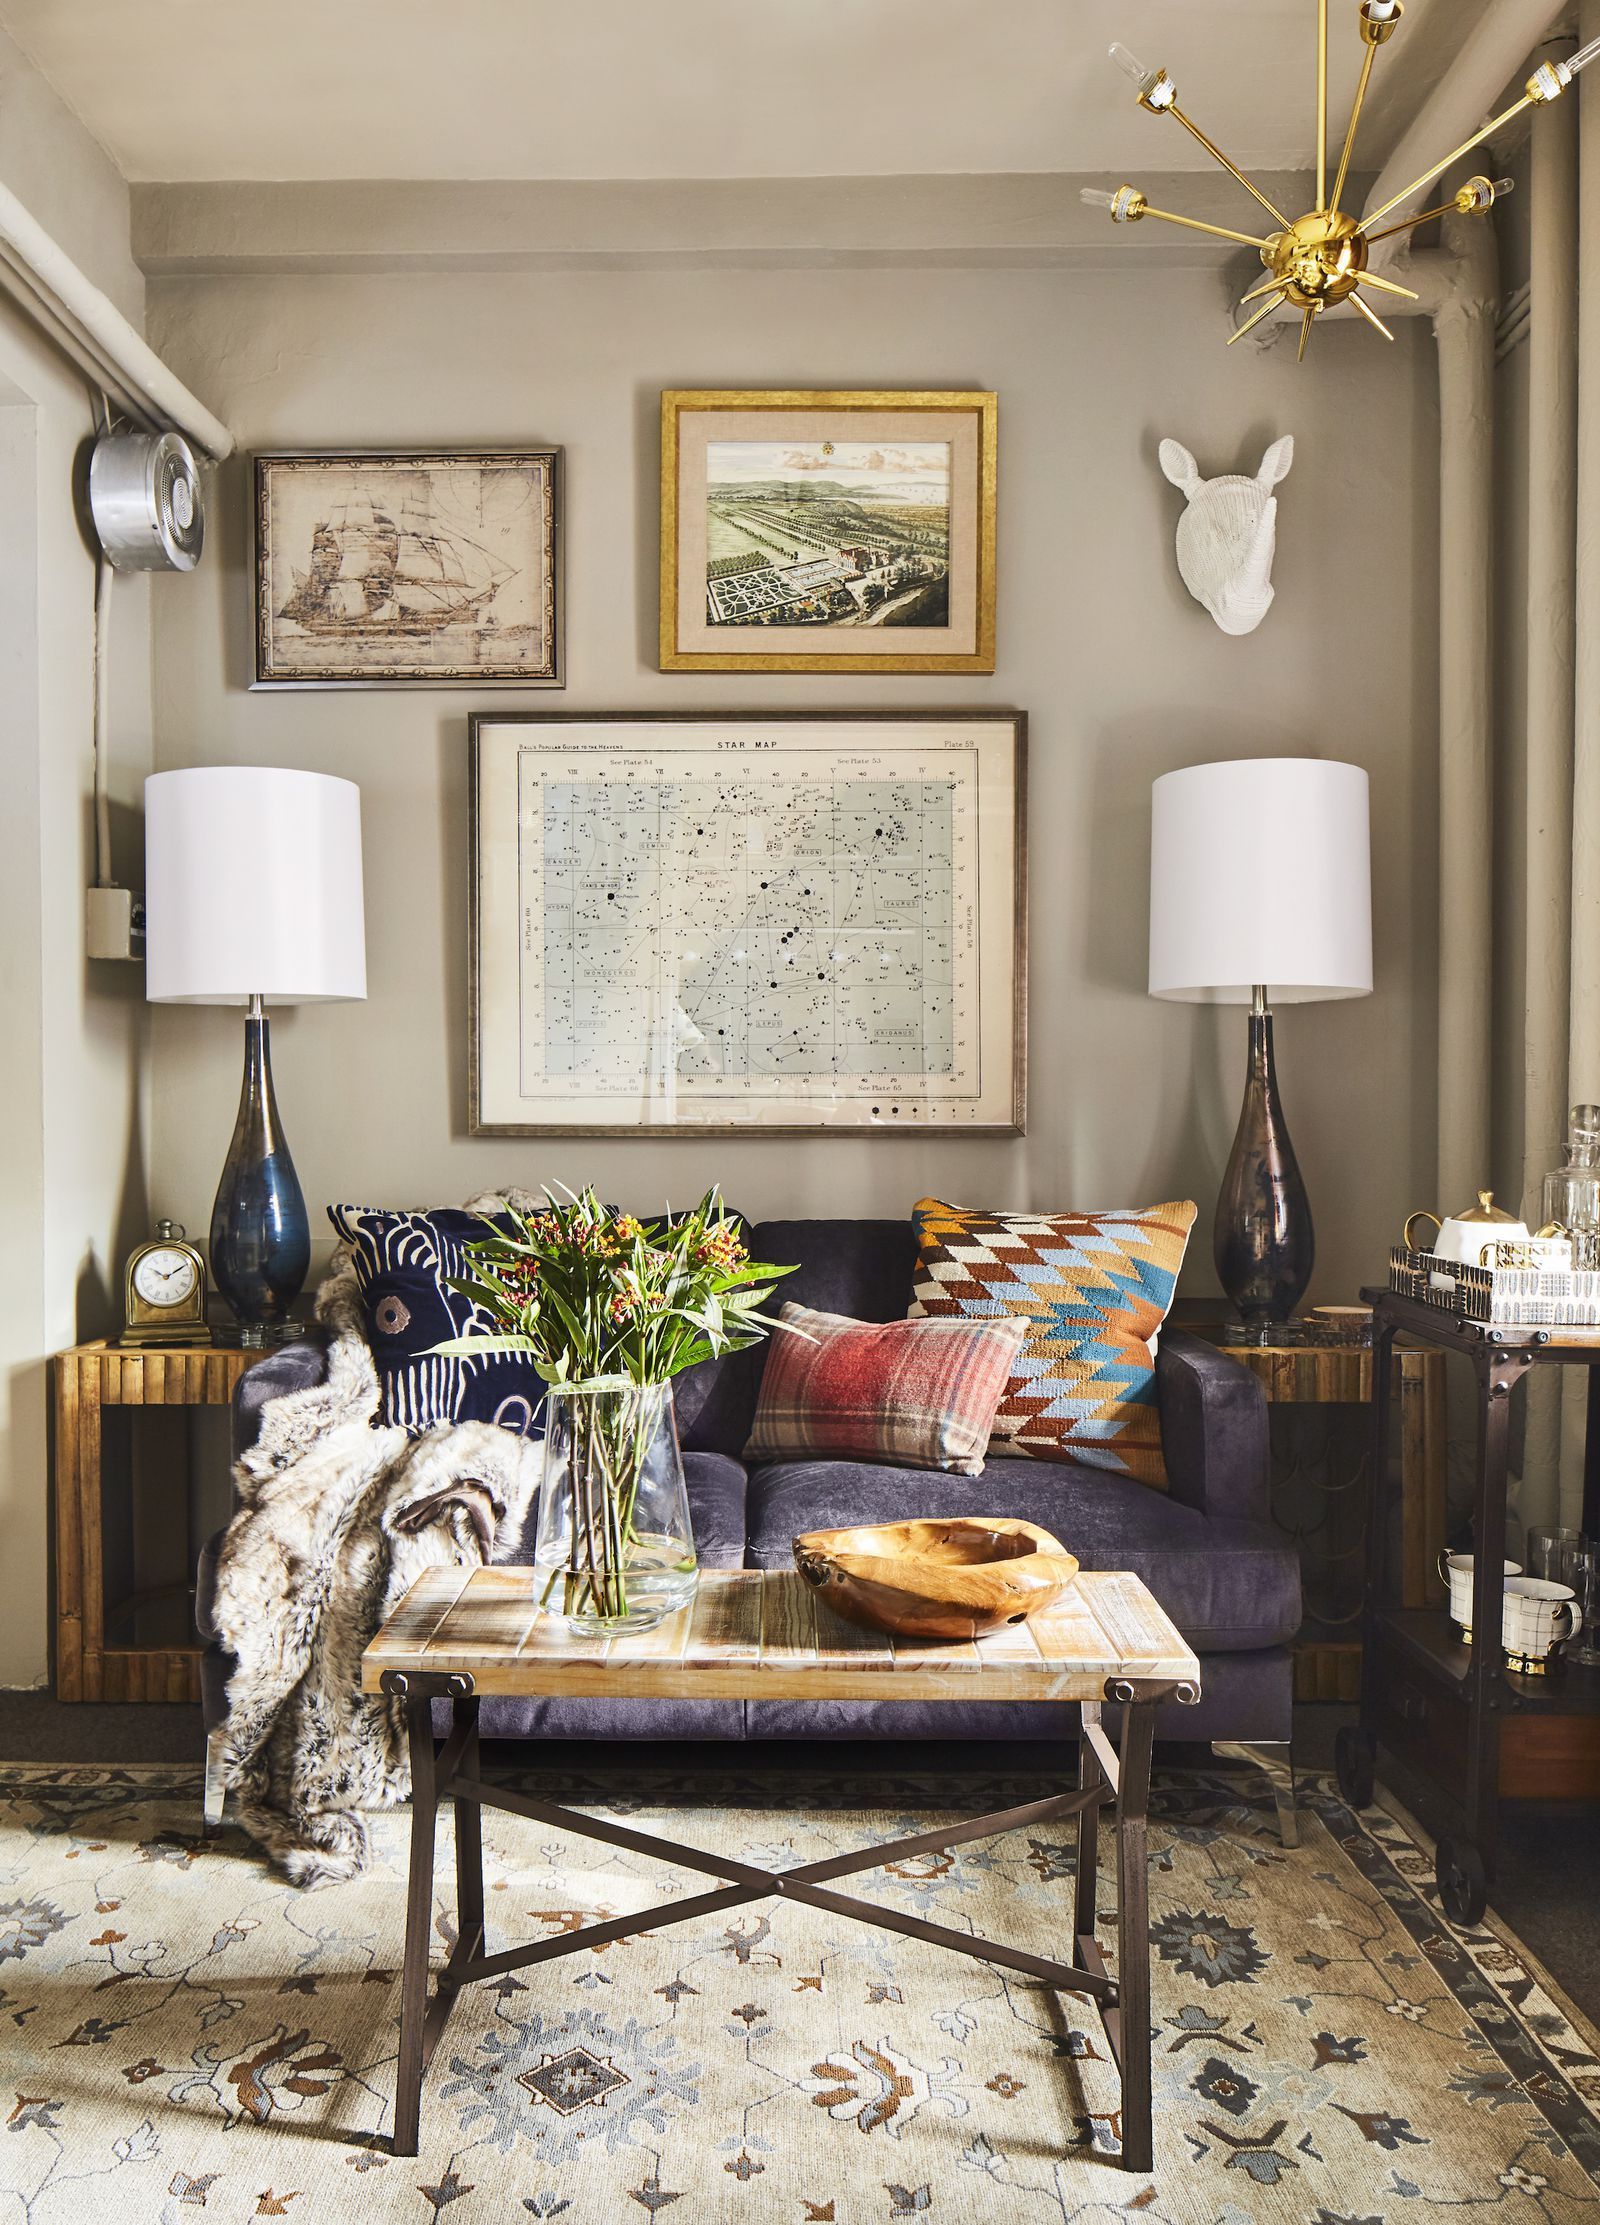 Decorating Tips for Small Spaces - Advice from Designer Mike Harrison